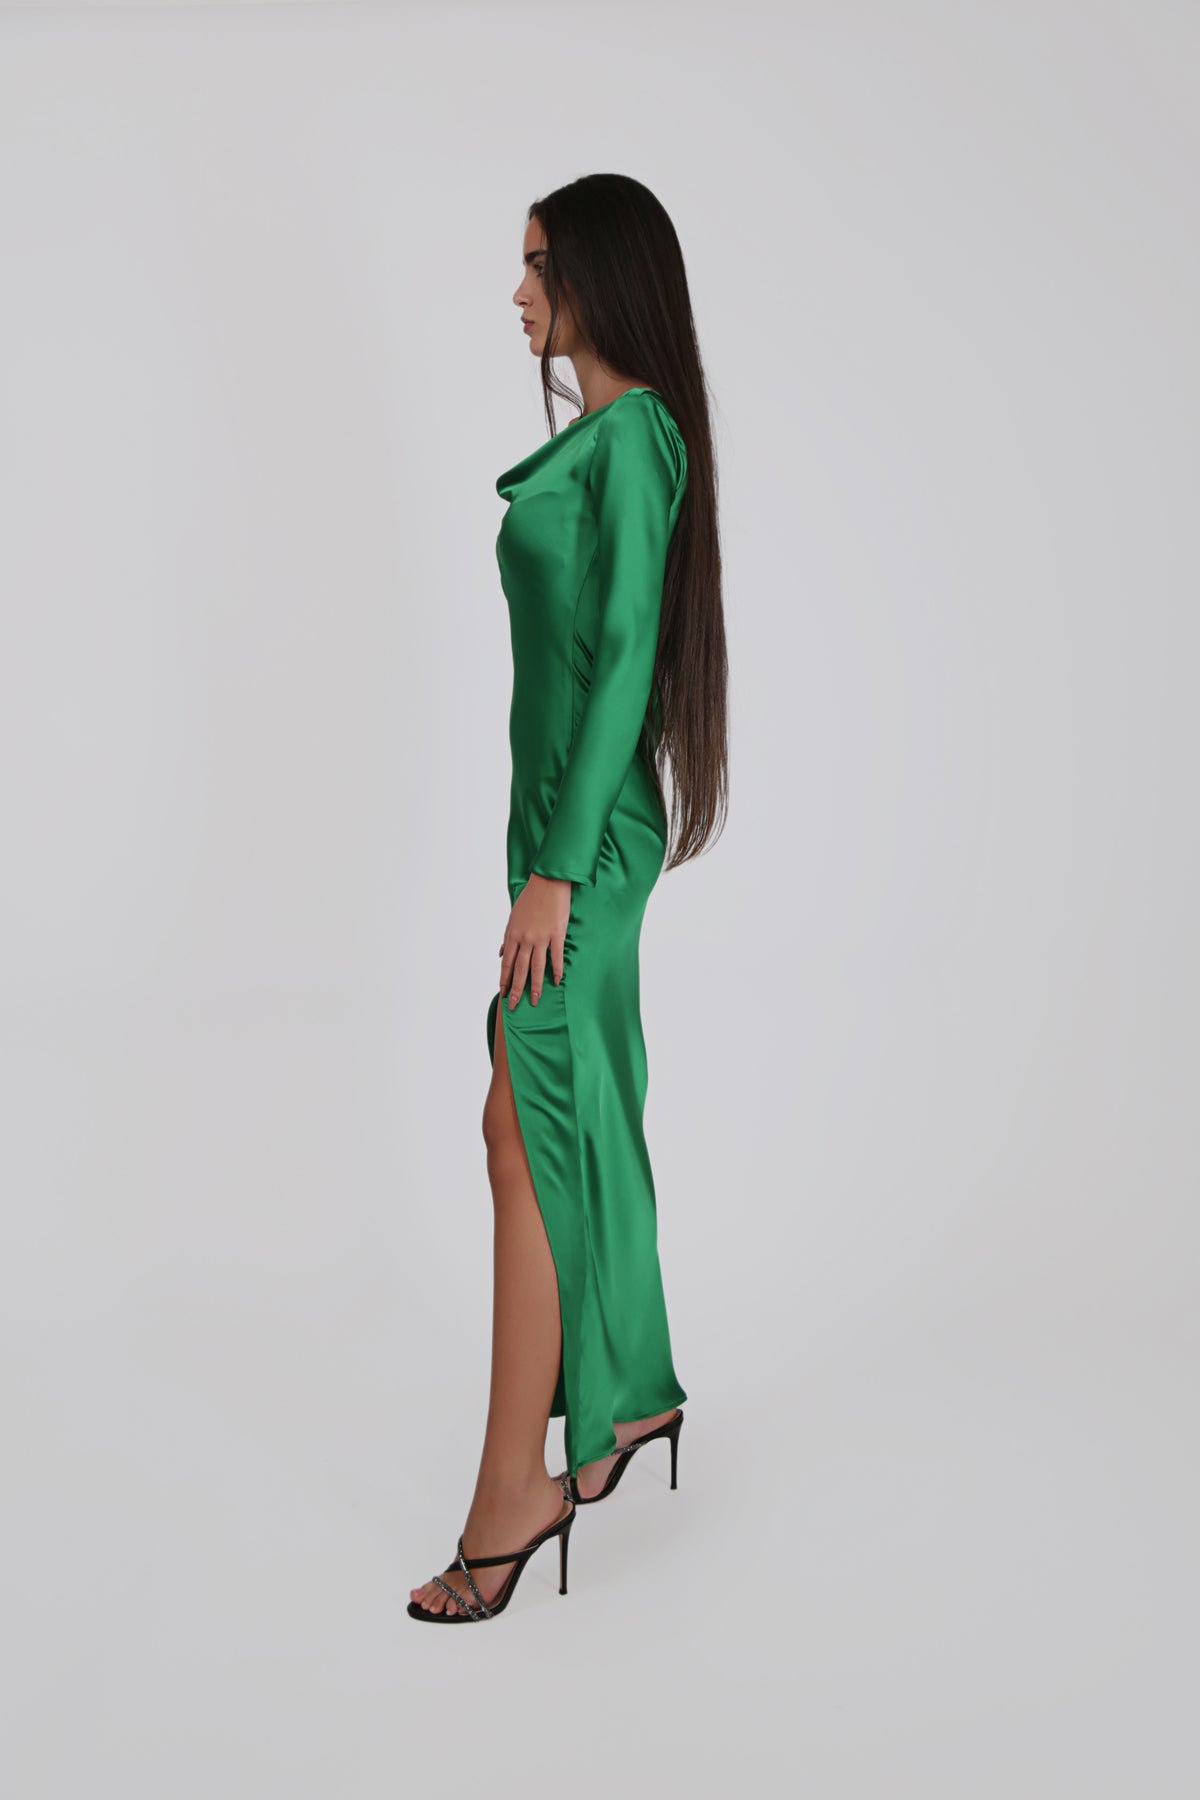 Long-Sleeved Satin Dress with Frontal Slit